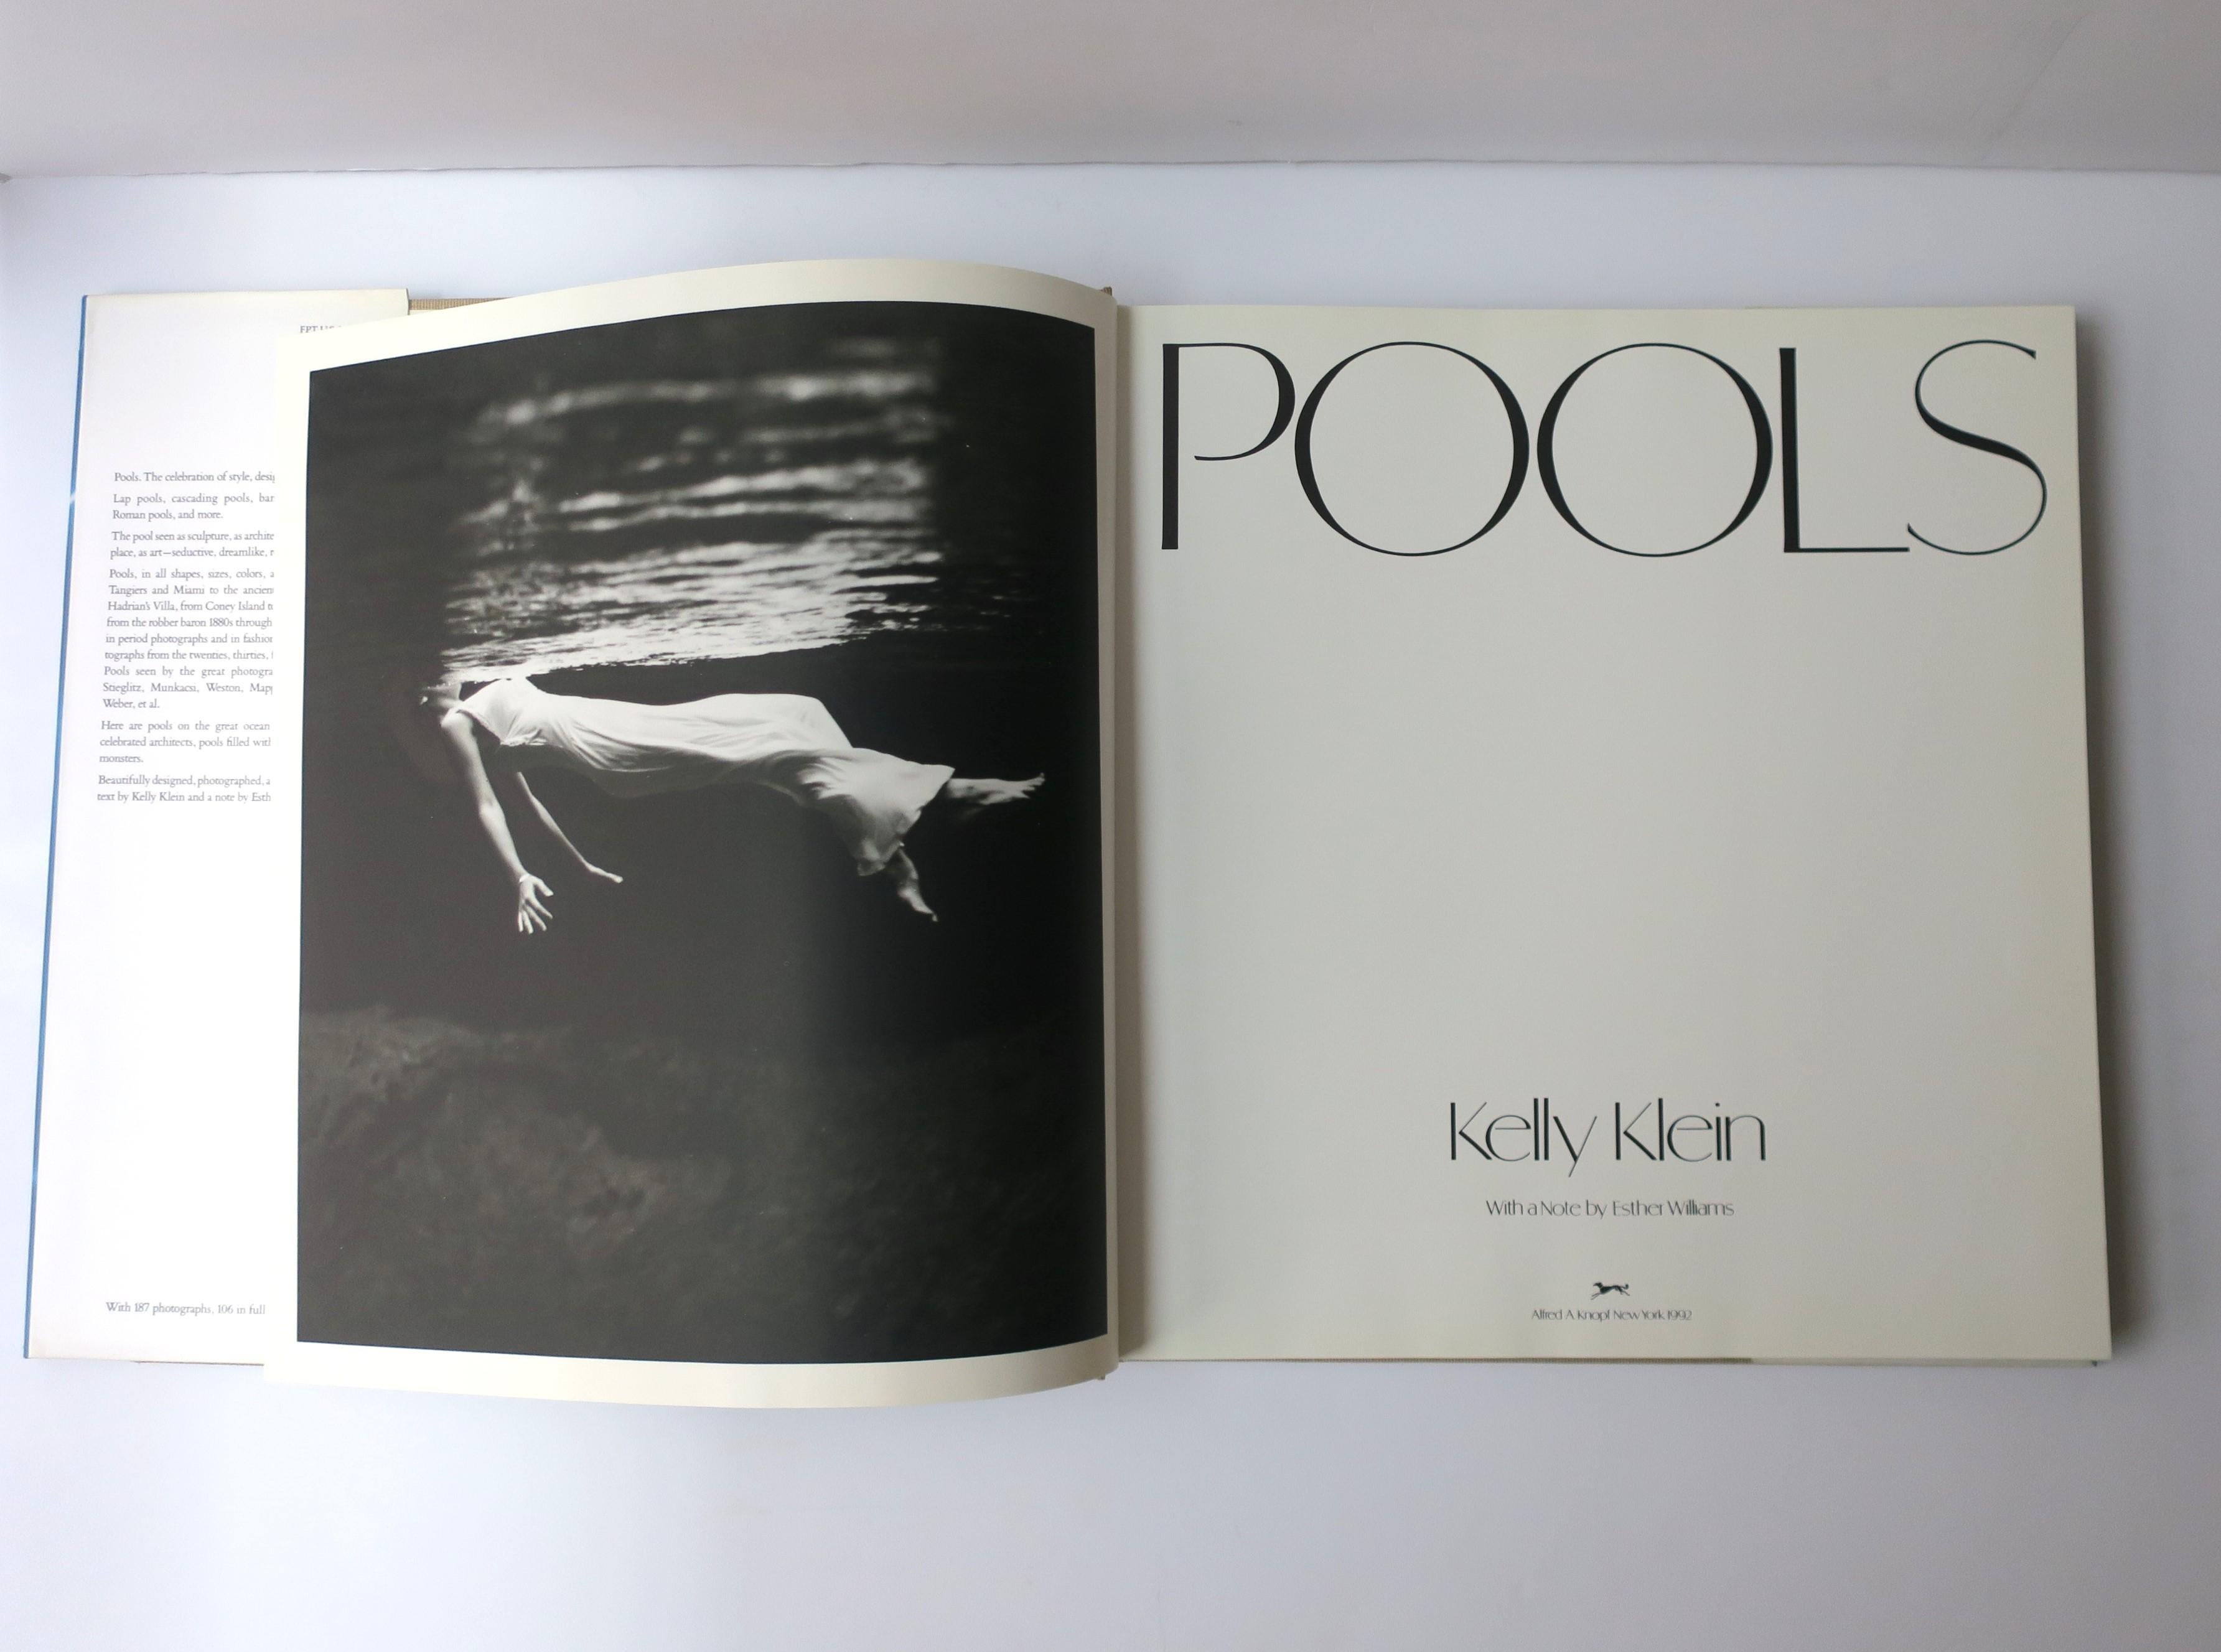 Pools by Kelly Klein an Architecture Coffee Table or Library Book, 1992 For Sale 3